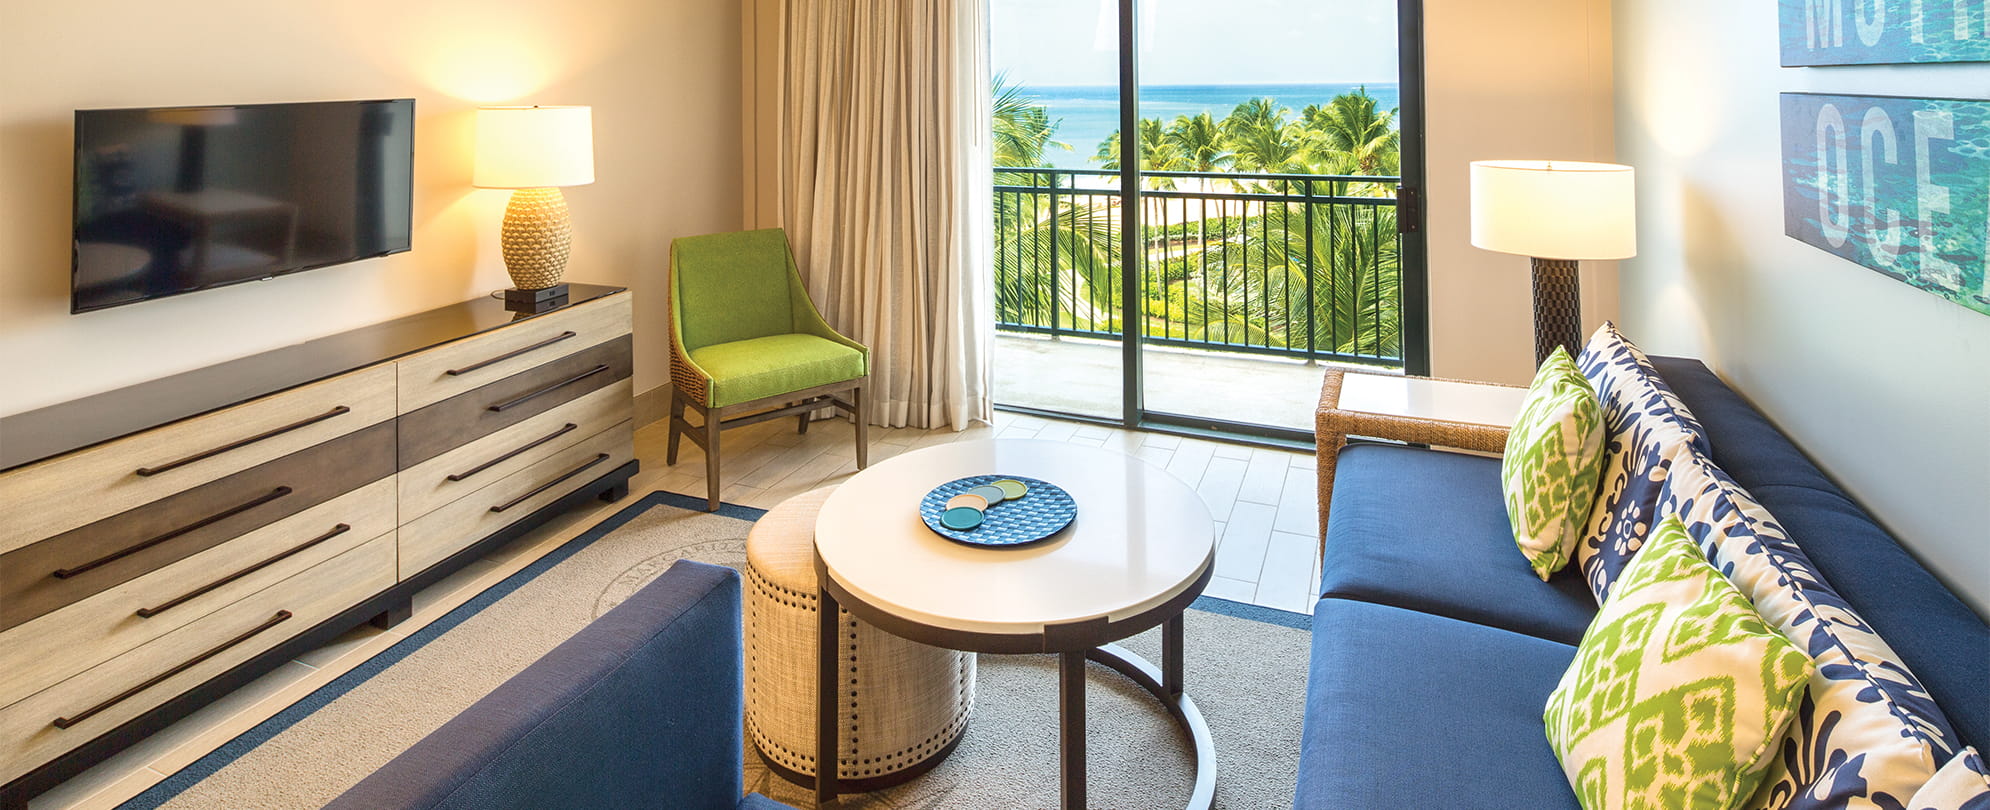 Suite living room with a sliding door to an oceanview balcony at Margaritaville Vacation Club by Wyndham - Rio Mar.